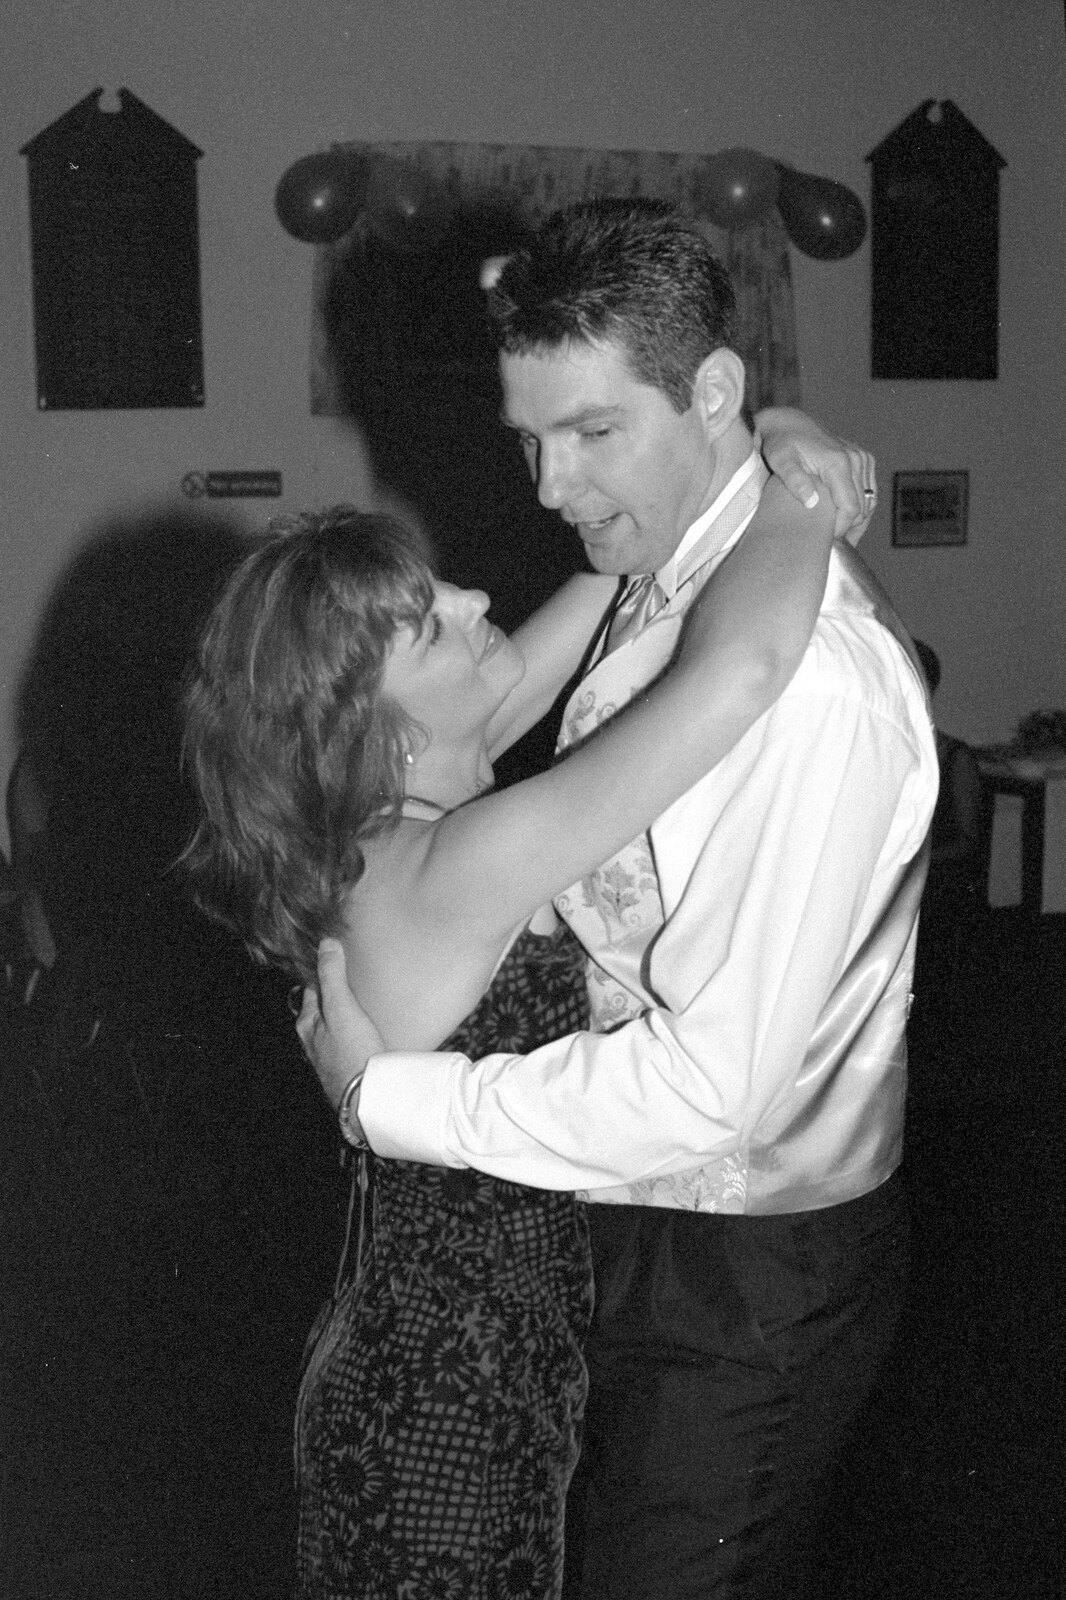 Michelle and Sean do a first dance from Sean and Michelle's Wedding, Bashley FC, New Milton - 12th August 2000